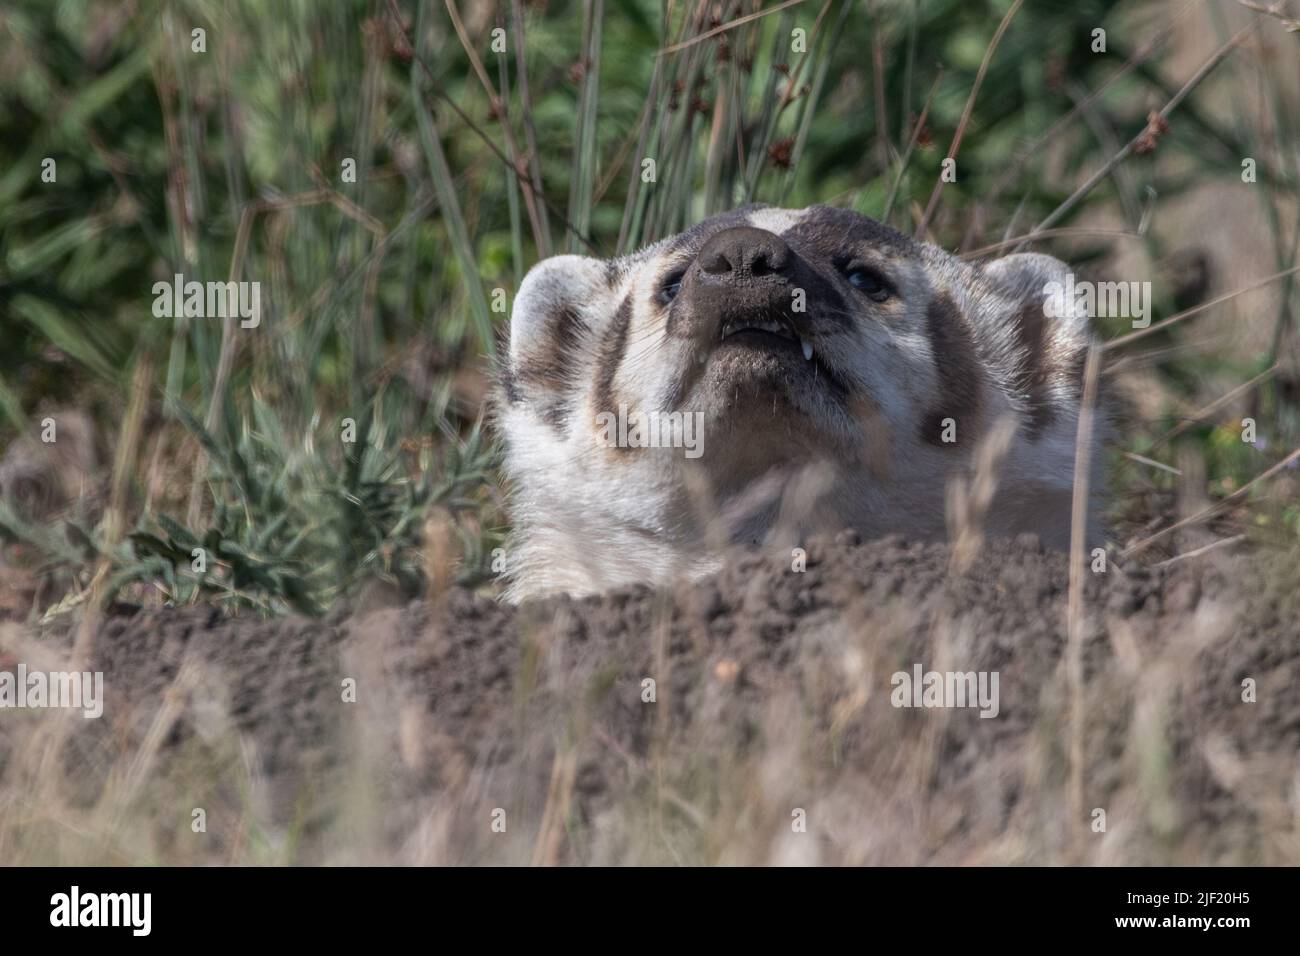 An American badger (Taxidea taxus) in Point Reyes National seashore in Marin county, California, USA. Stock Photo